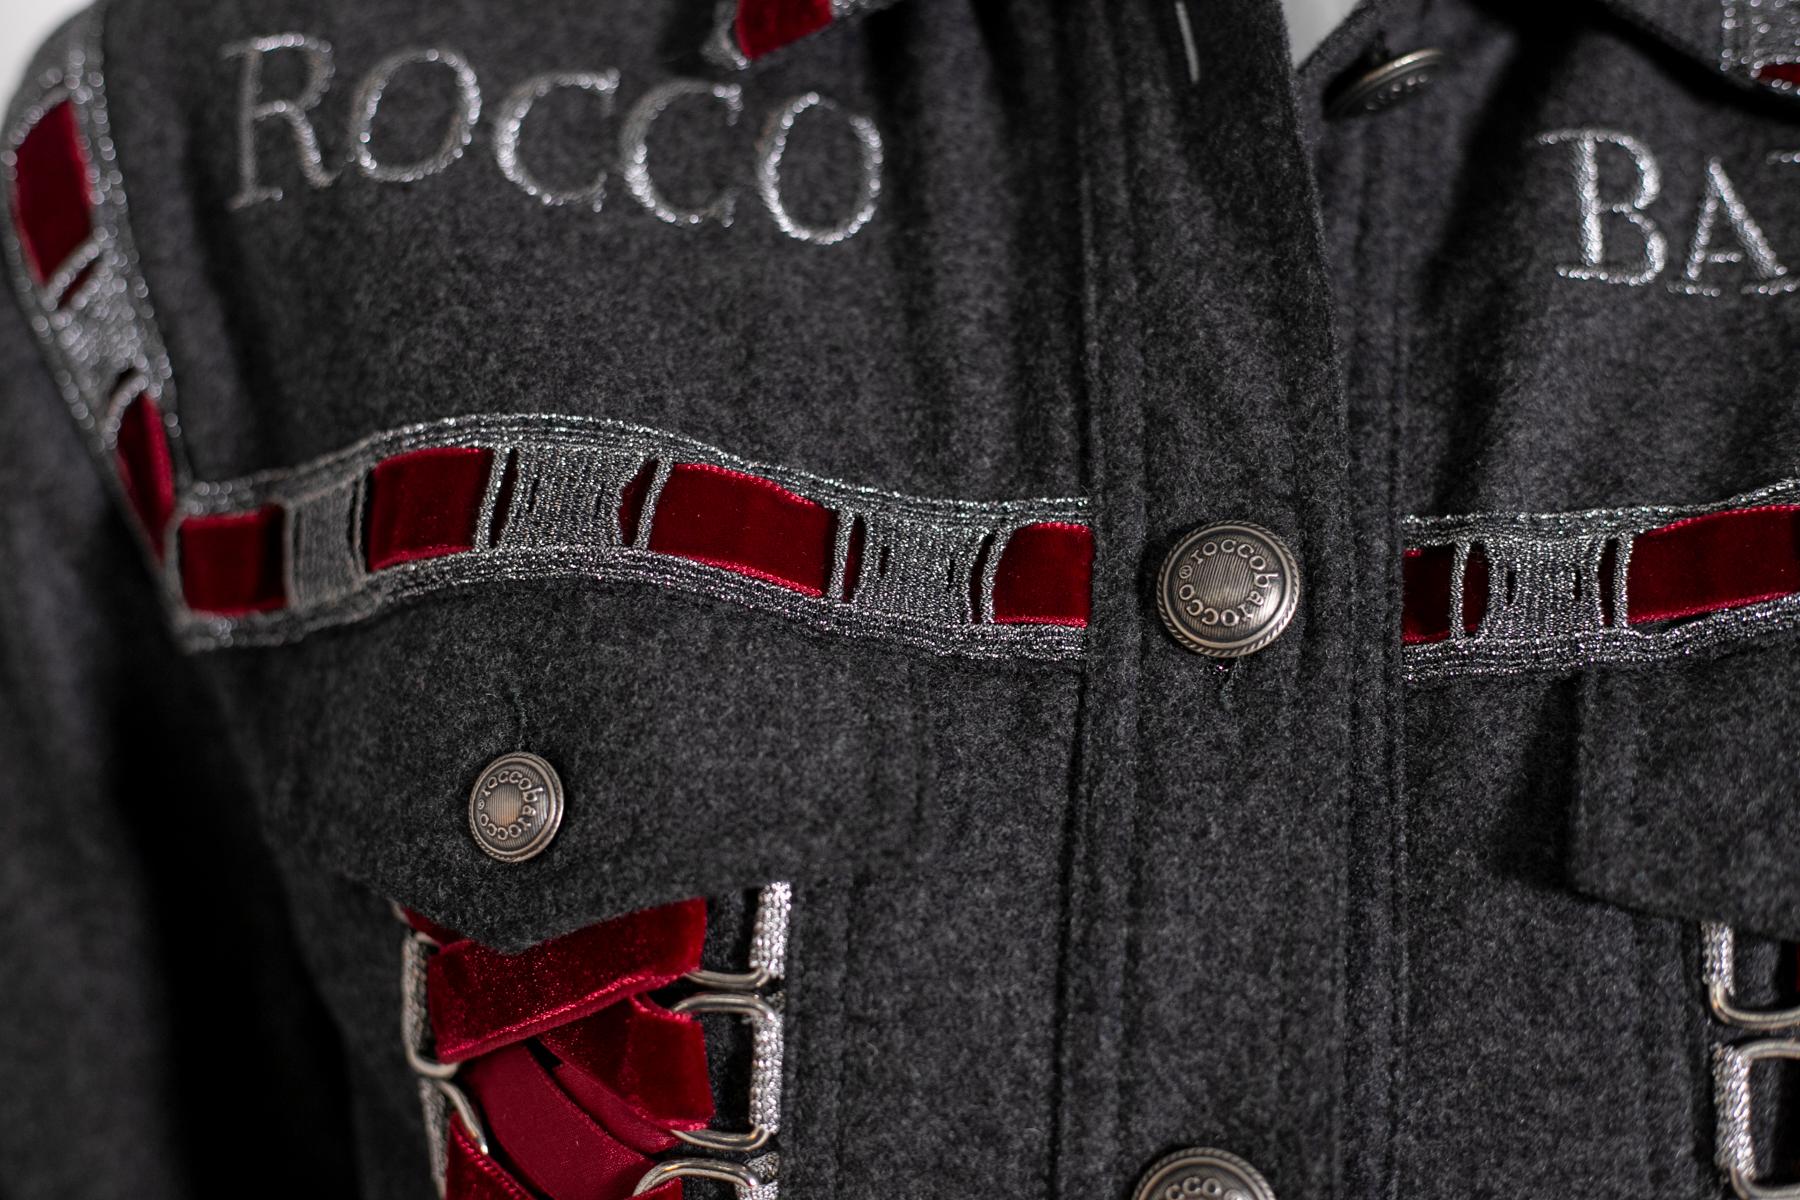 RoccoBarocco Jacket in Jeans and Red Velvet For Sale 4